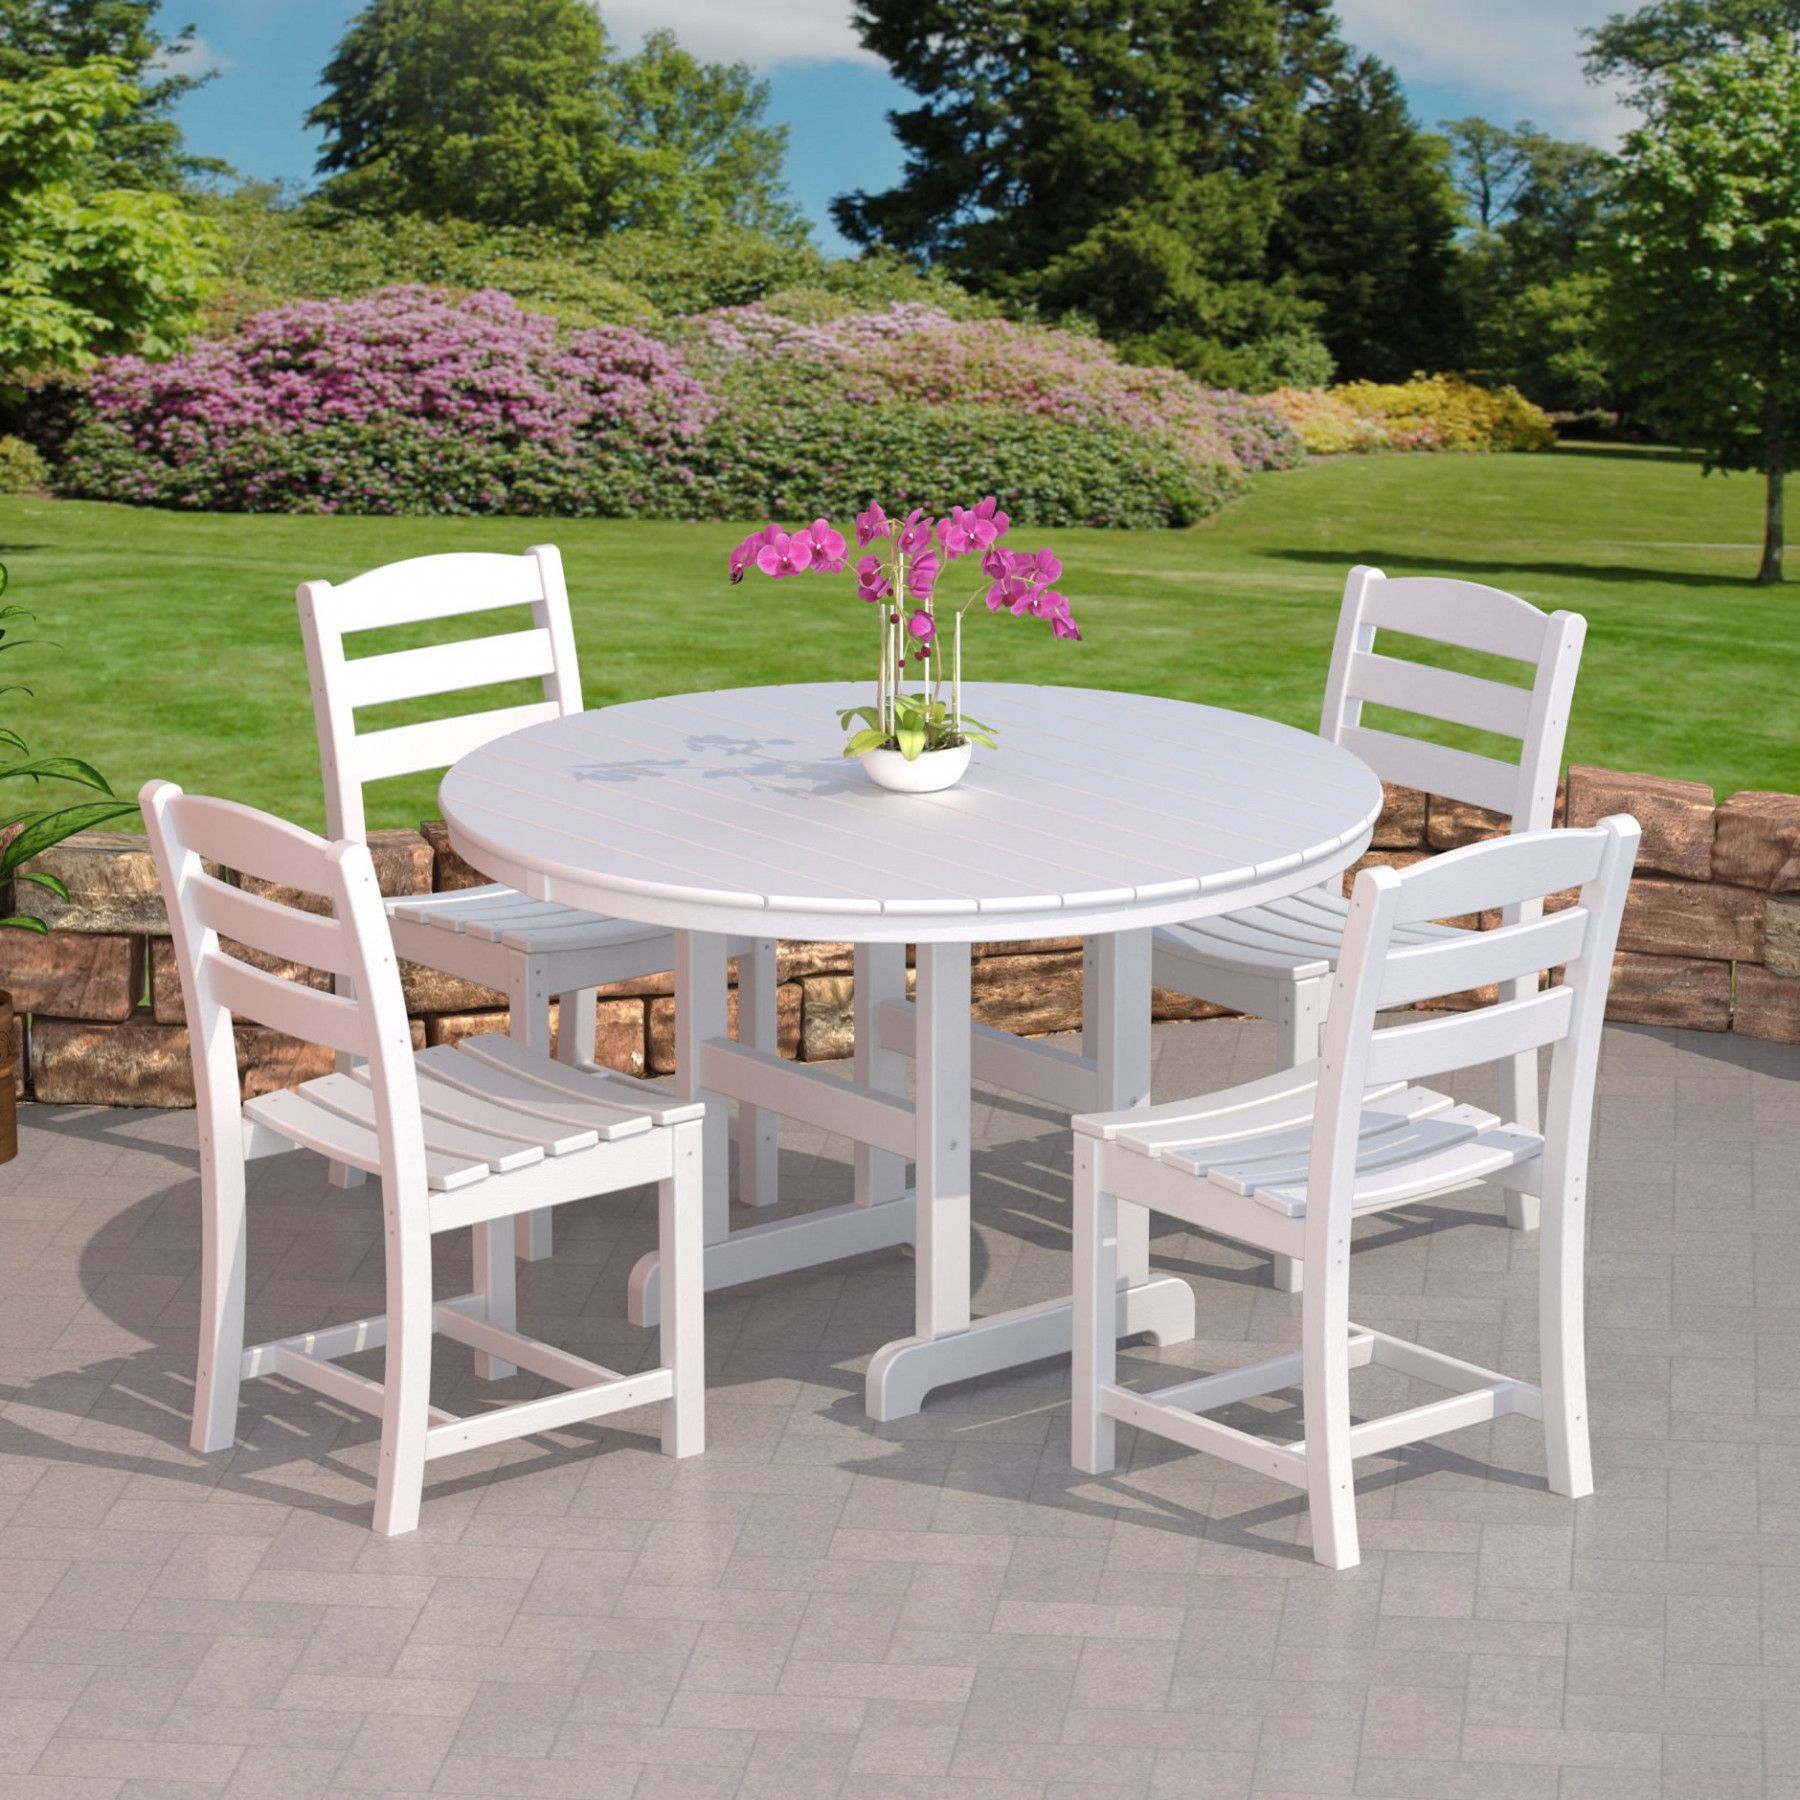 Off White Outdoor Seating Patio Sets In Famous Polywood® La Casa Cafe Outdoor Dining Set – Commercial – Collections (View 1 of 15)